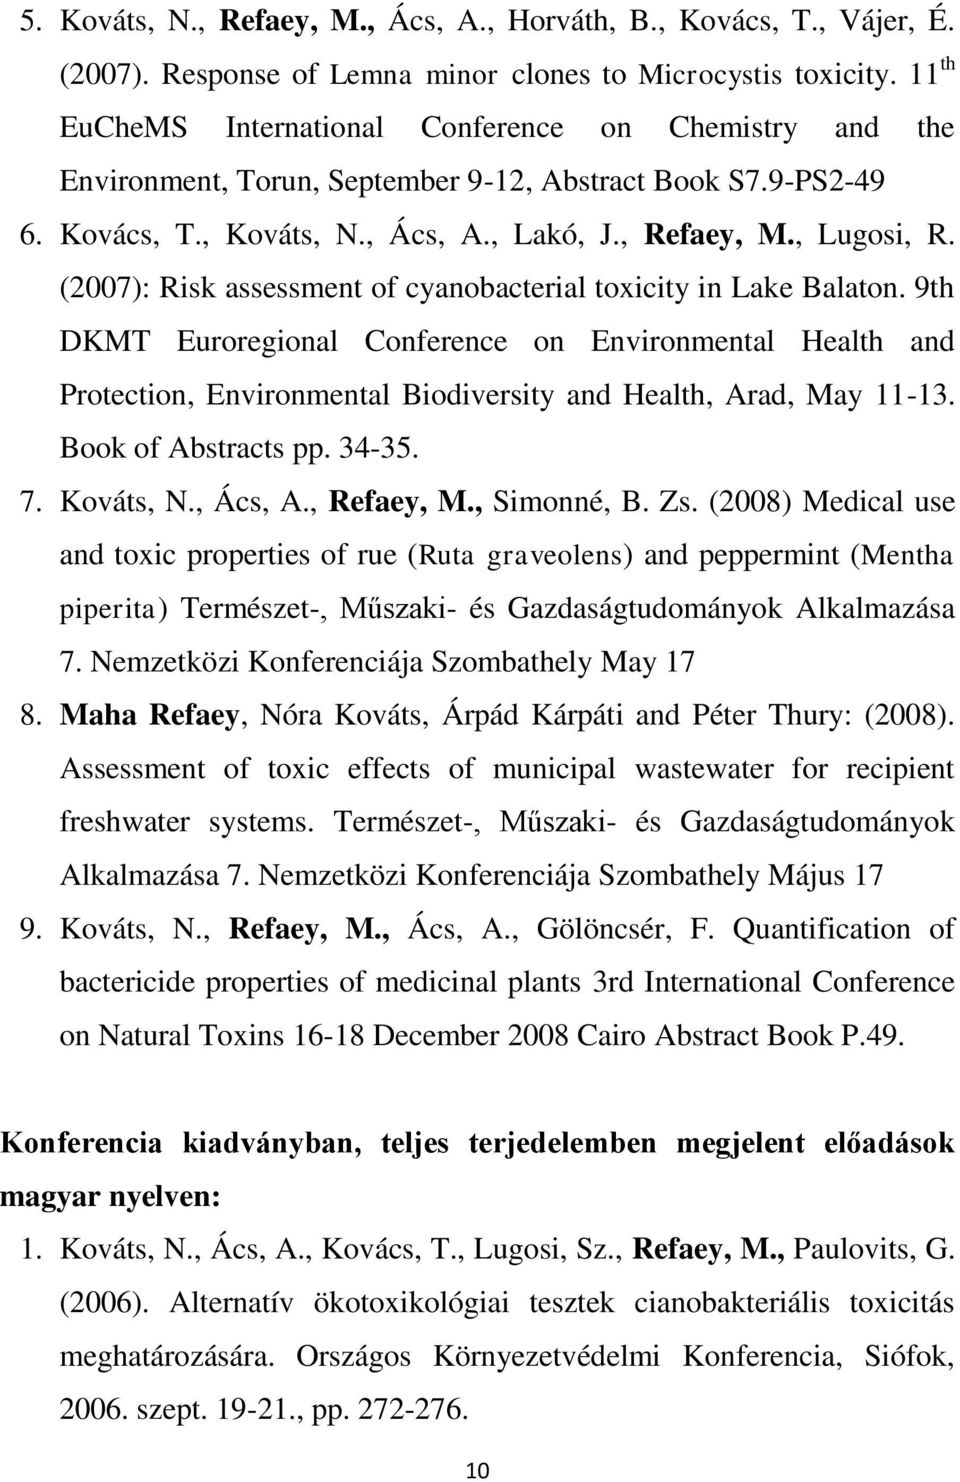 (2007): Risk assessment of cyanobacterial toxicity in Lake Balaton. 9th DKMT Euroregional Conference on Environmental Health and Protection, Environmental Biodiversity and Health, Arad, May 11-13.